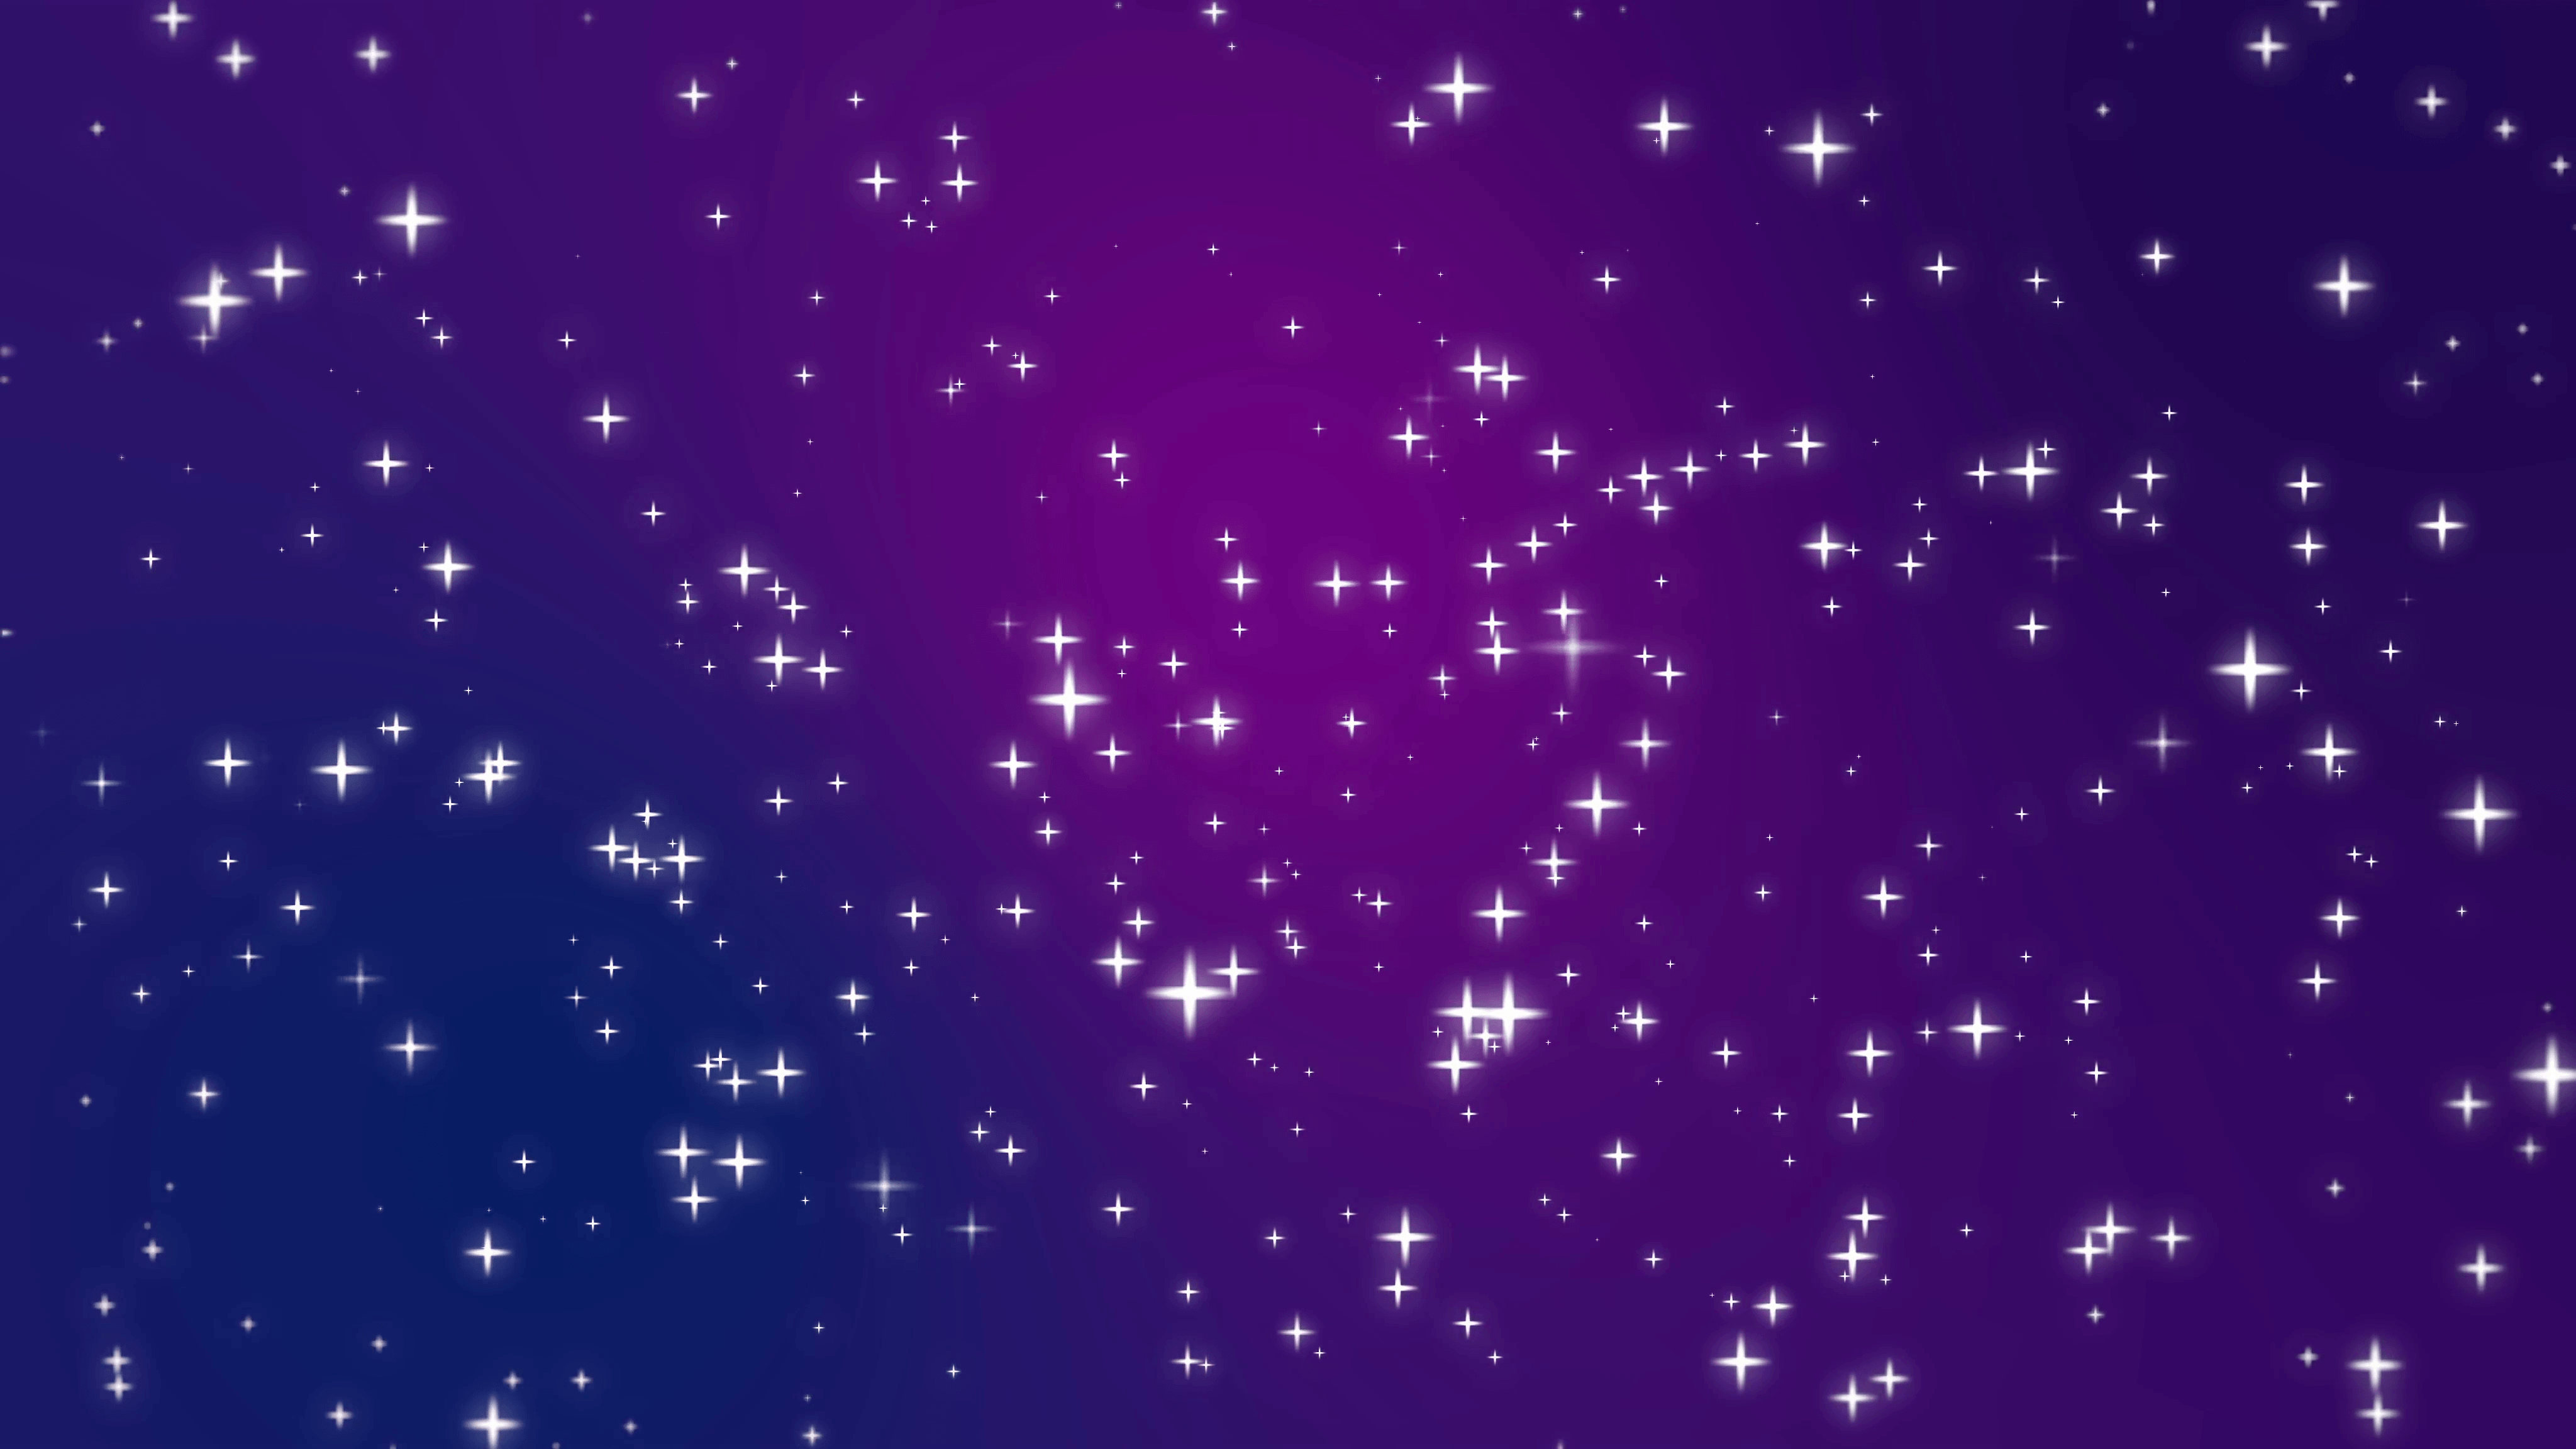 Night Sky Stars Backgrounds - Wallpaper Cave